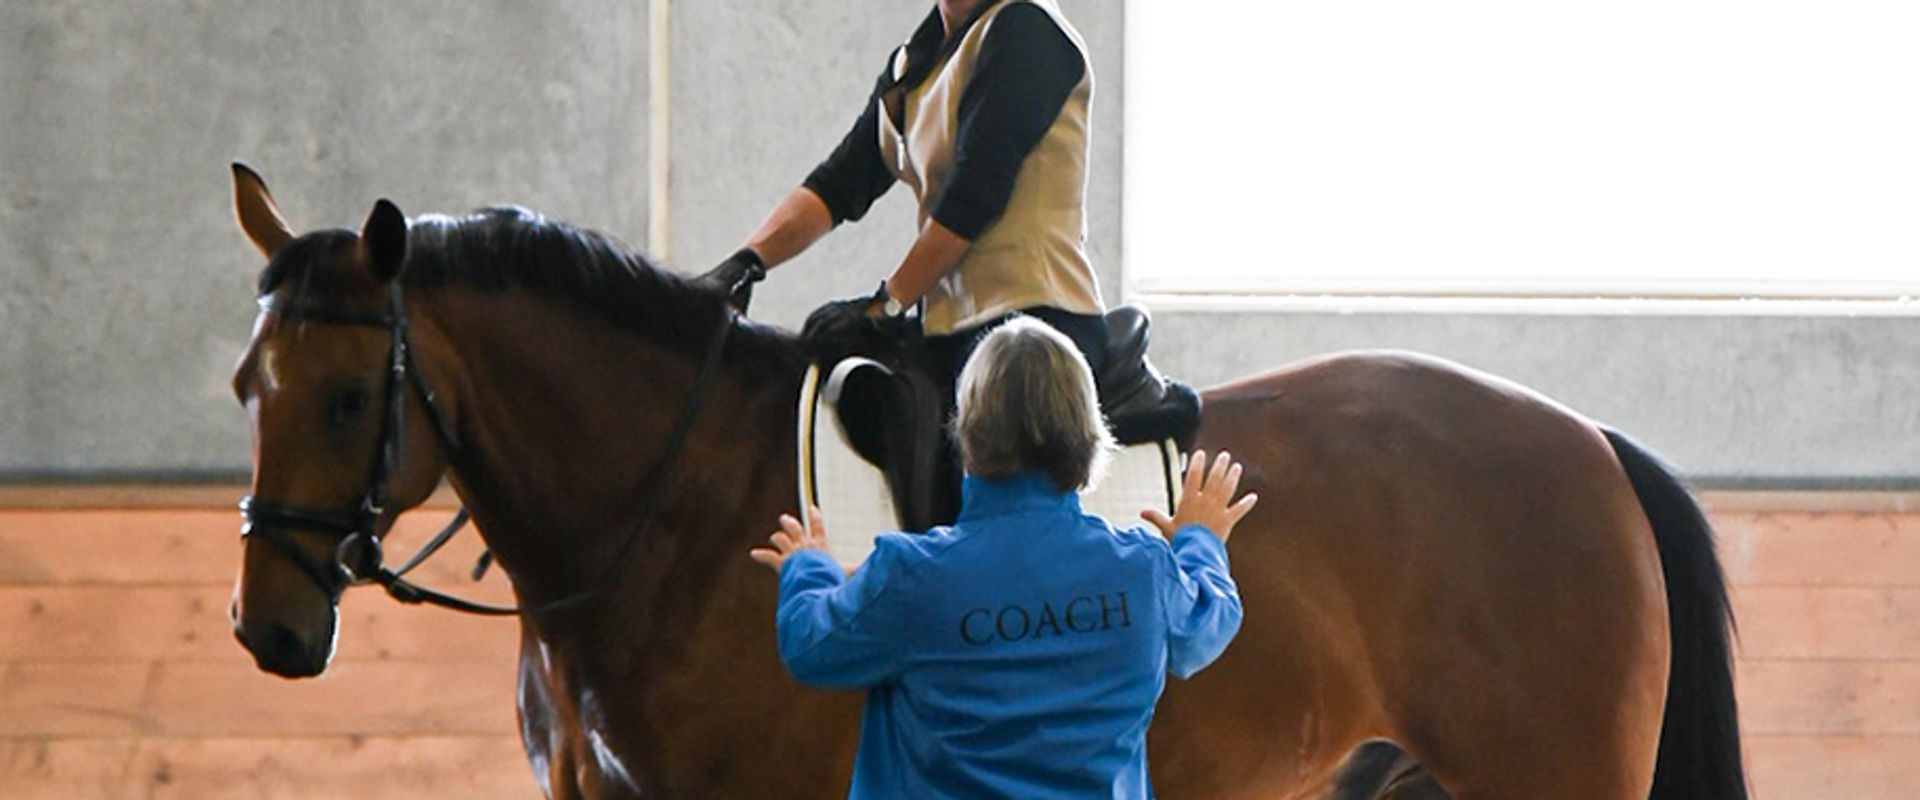 Instructor educating rider on a horse